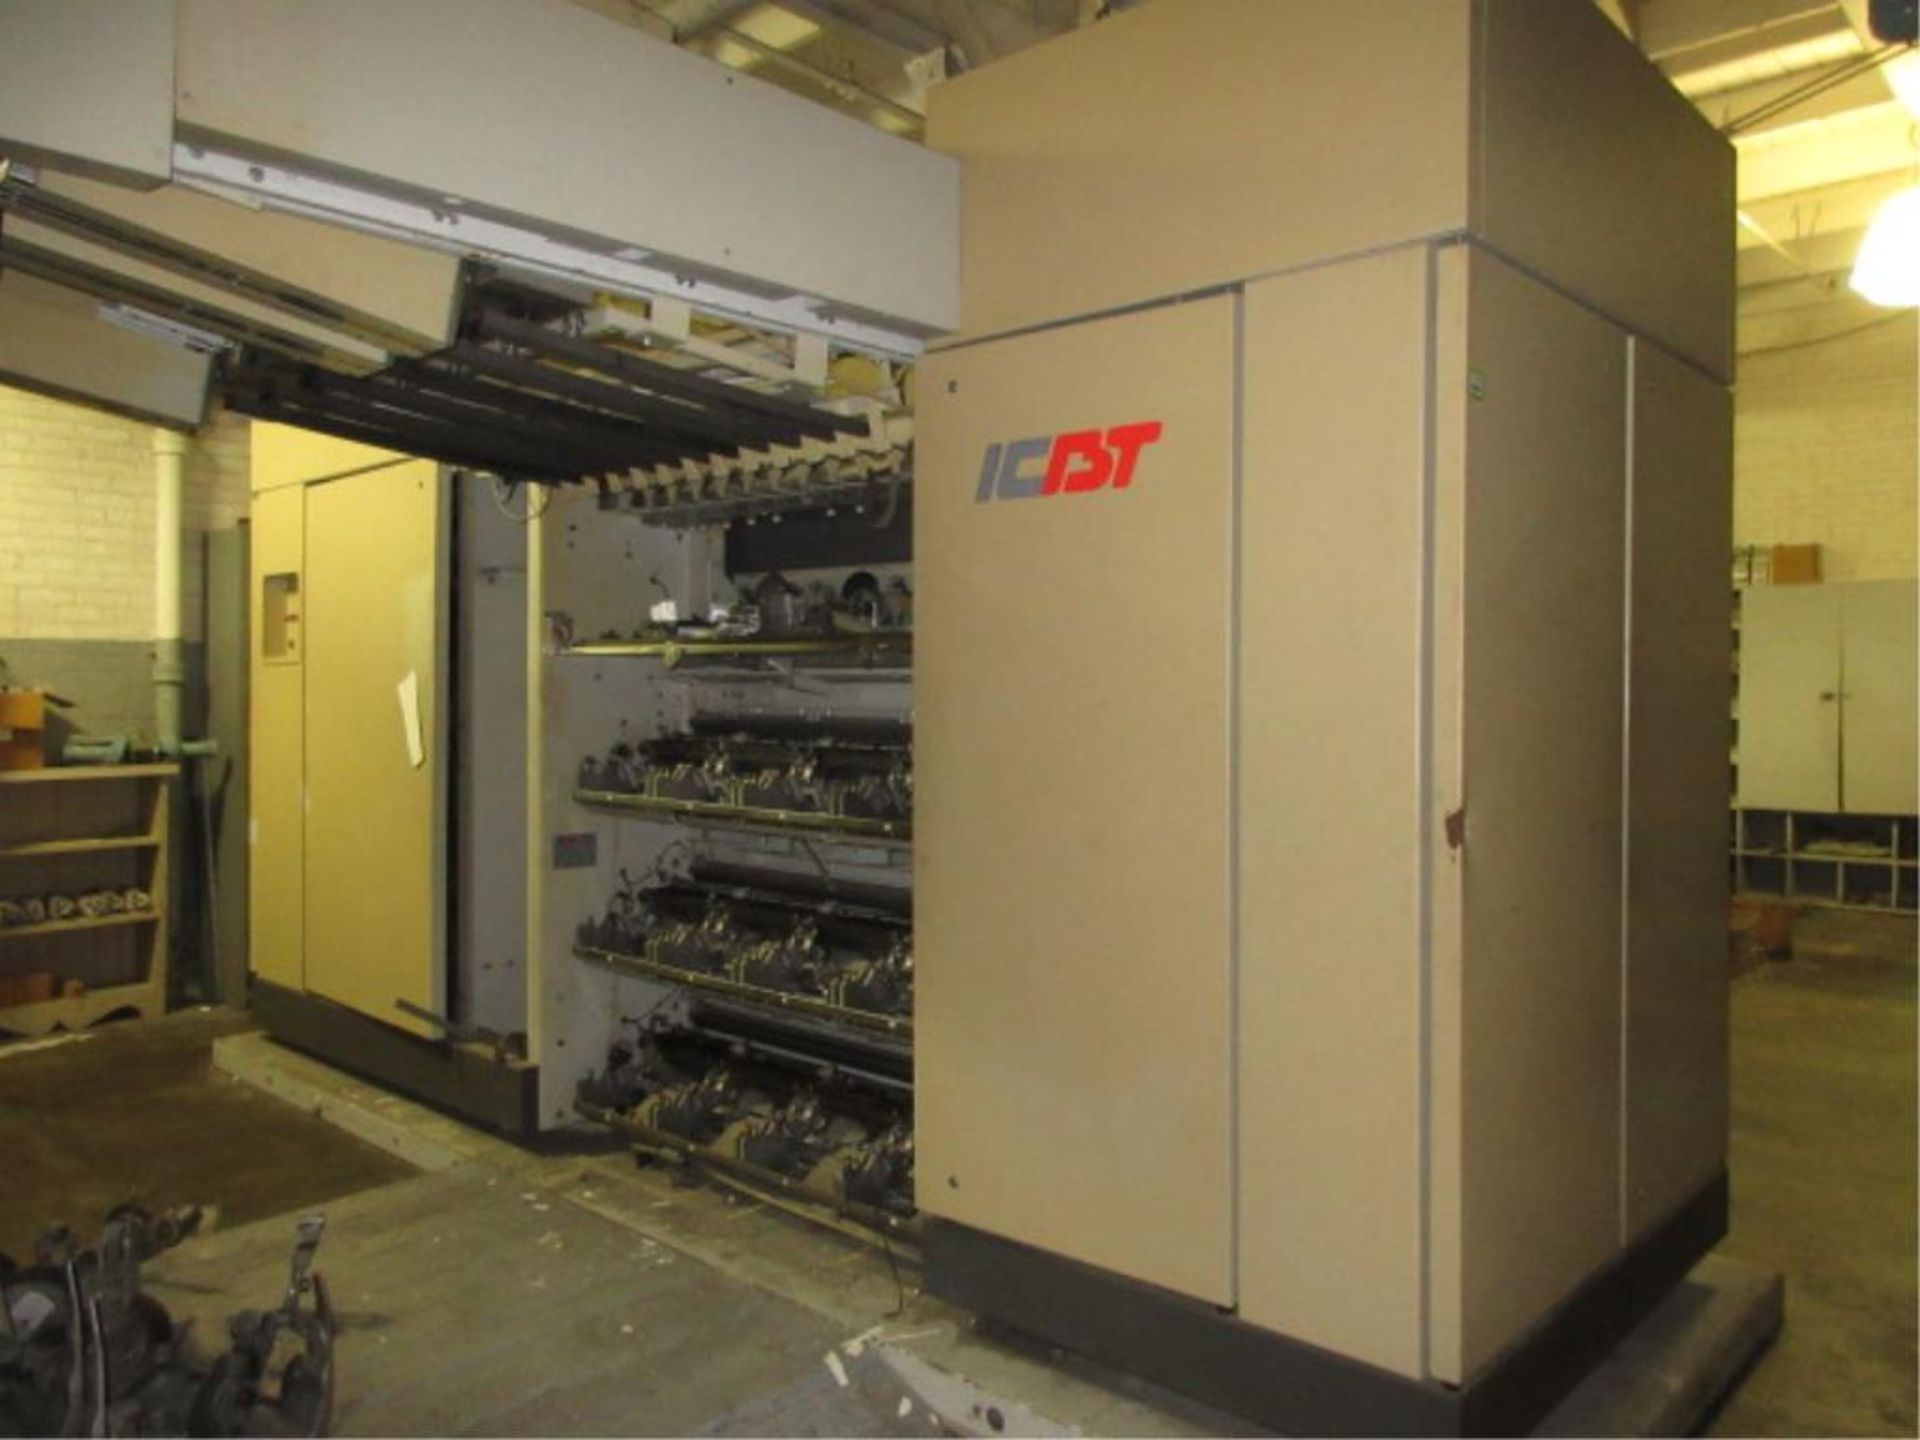 ICBT FT15-E3 HT Sample Texturing Machine, (1996), parted out, not in running condition, please - Image 2 of 7